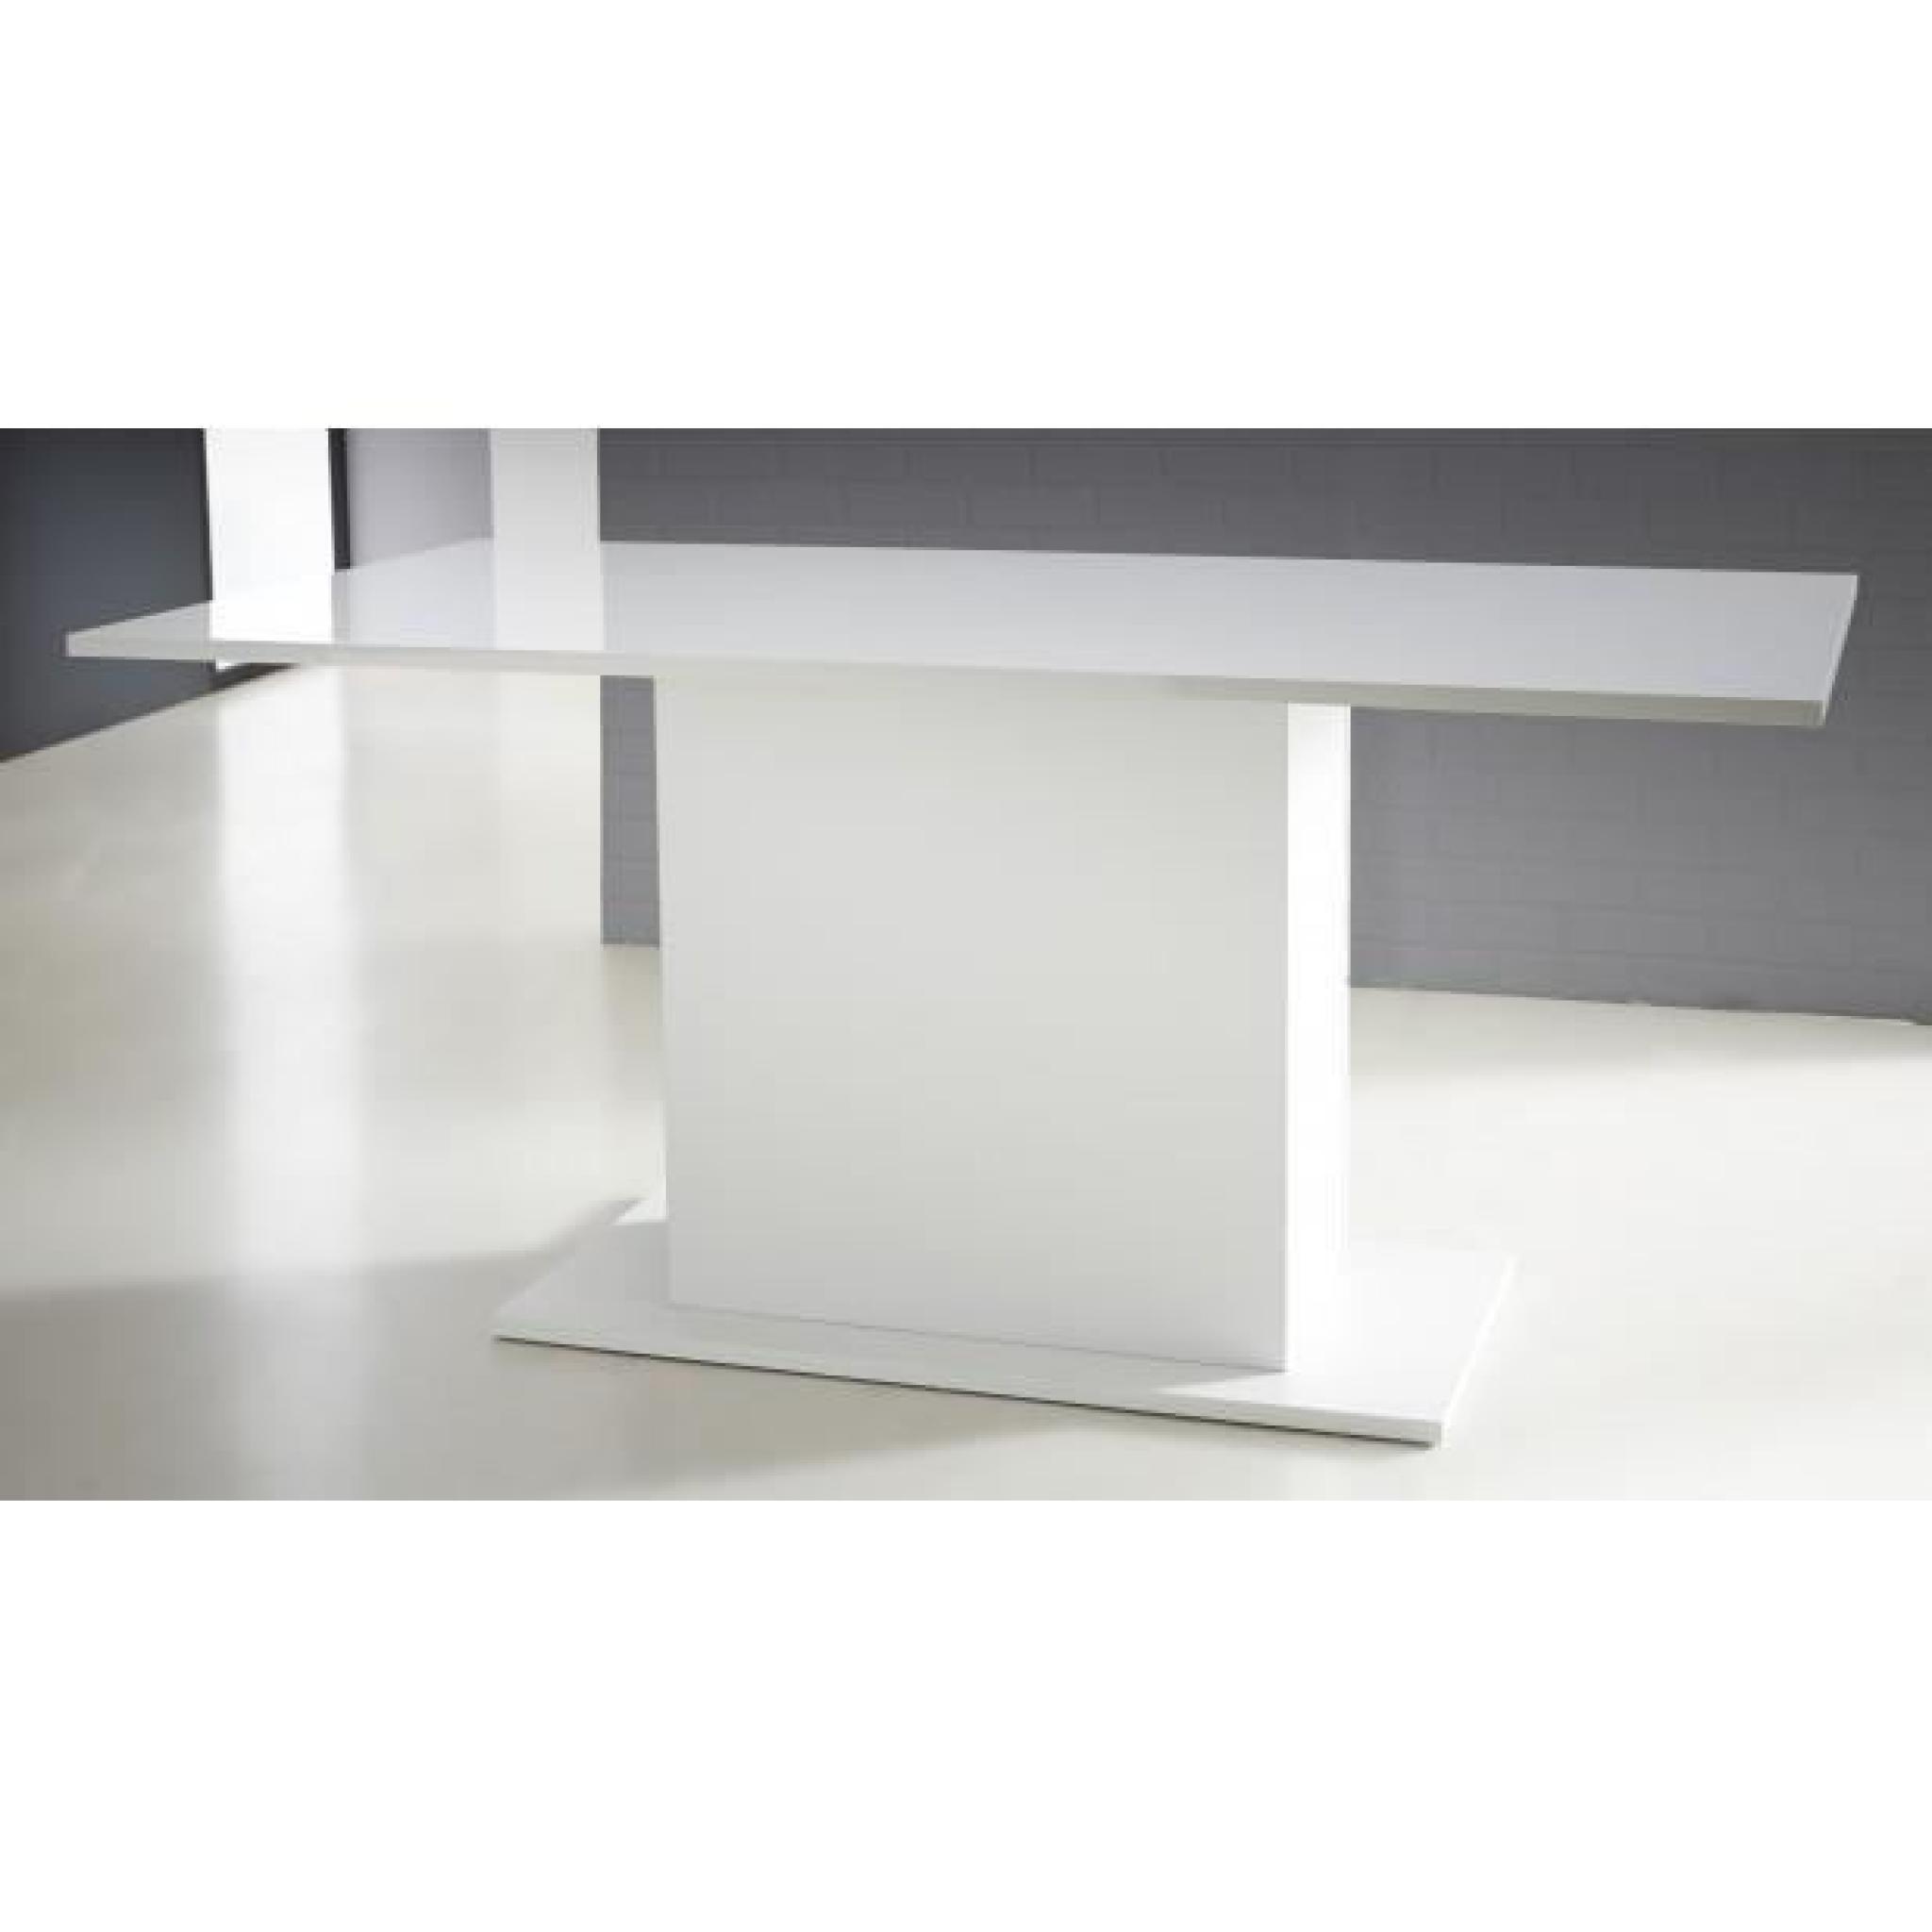 TABLE PIED CENTRAL ICY PERLE/BLANC BRILLANT pas cher